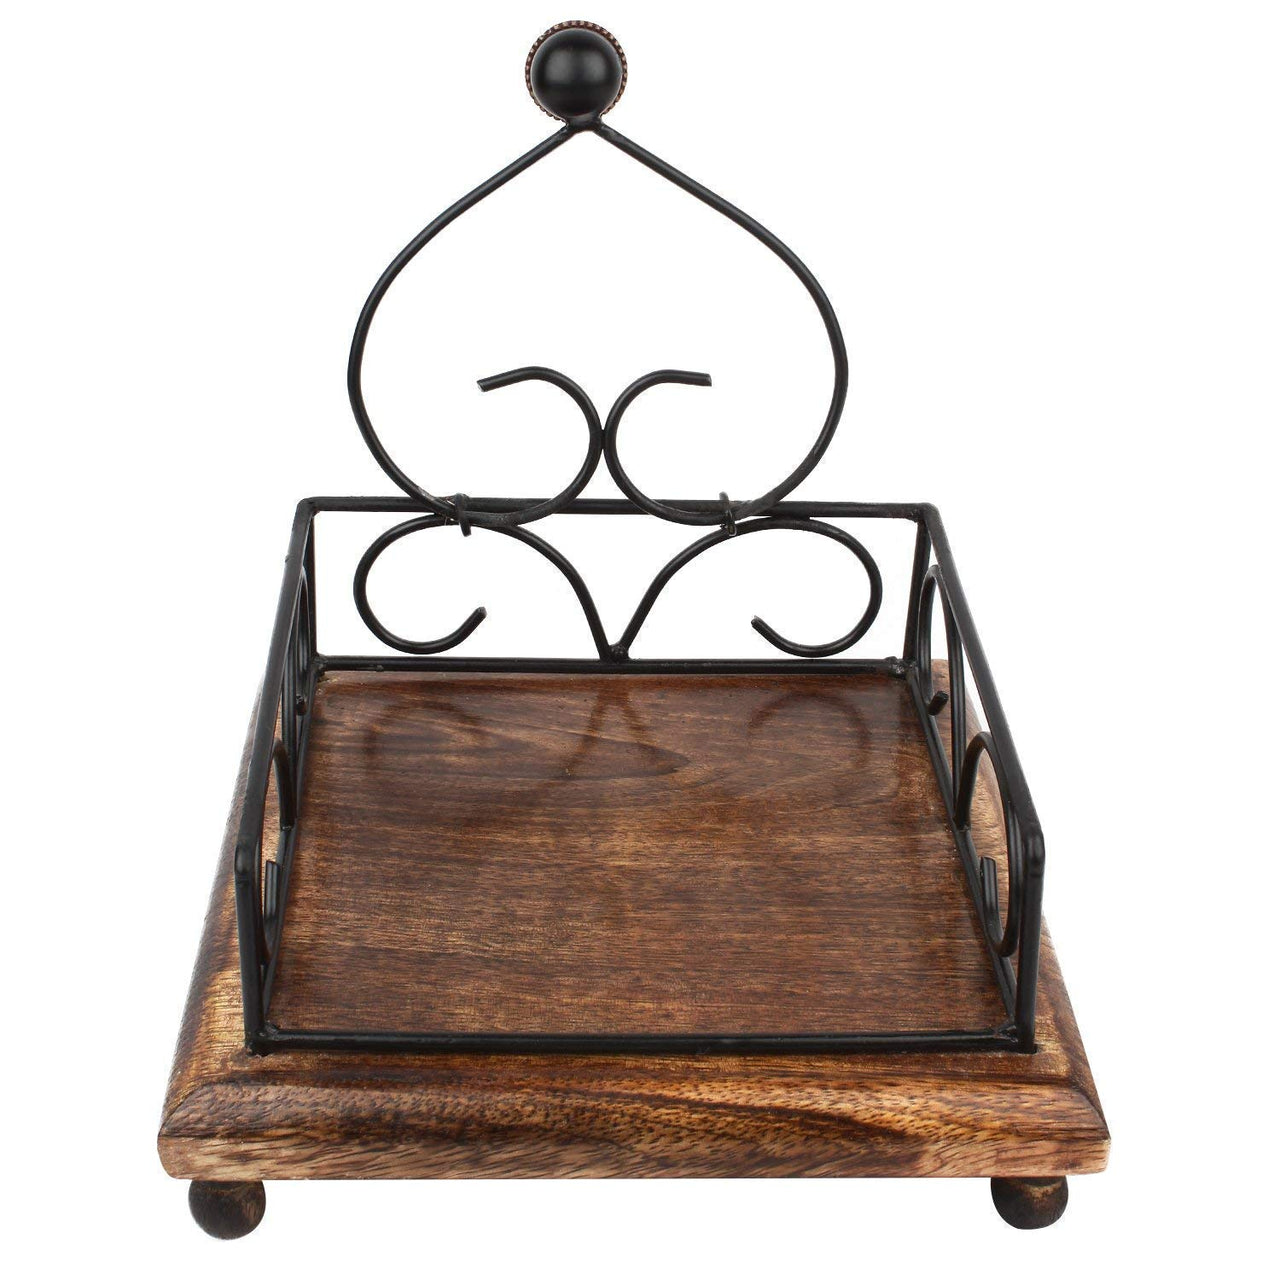 Wrought Iron and Wooden Napkin Holder for Dining Table, Kitchen - Tissue Paper Stand for Restaurant, Bathroom - Handmade Iron Tissue Box, Brown Dime Store